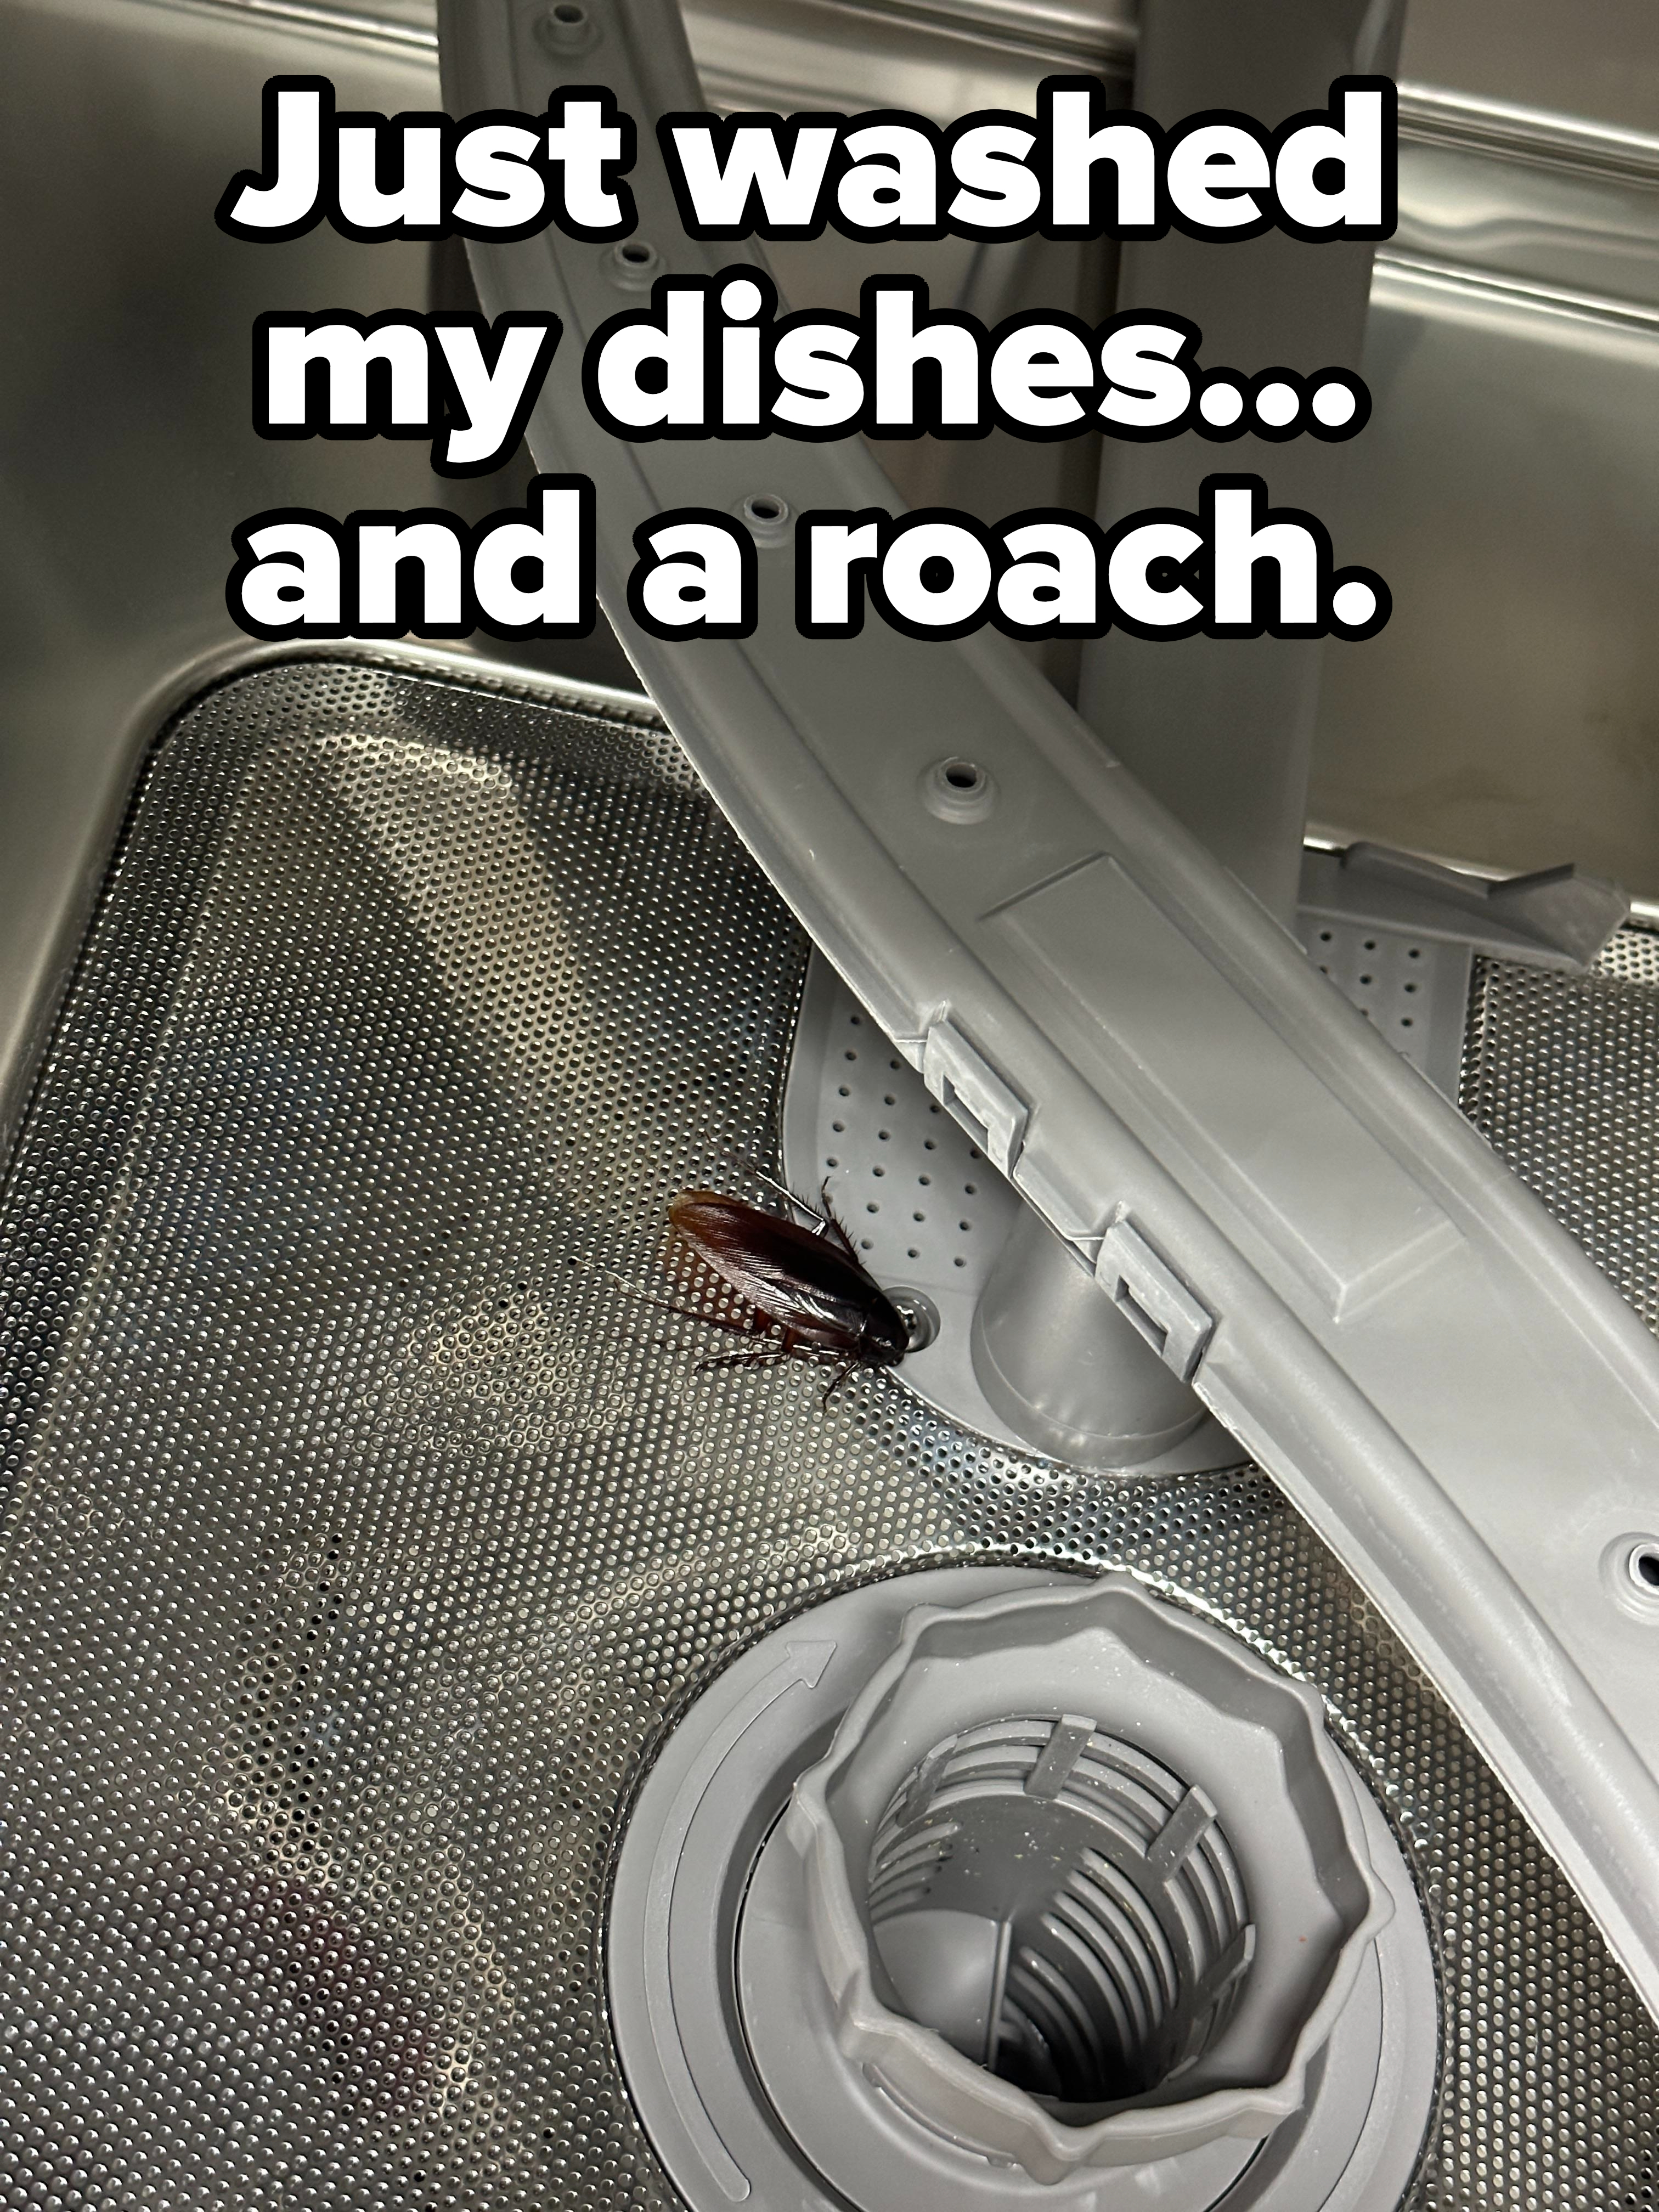 A large roach in a dishwasher with caption &quot;Just washed my dishes — and a roach&quot;